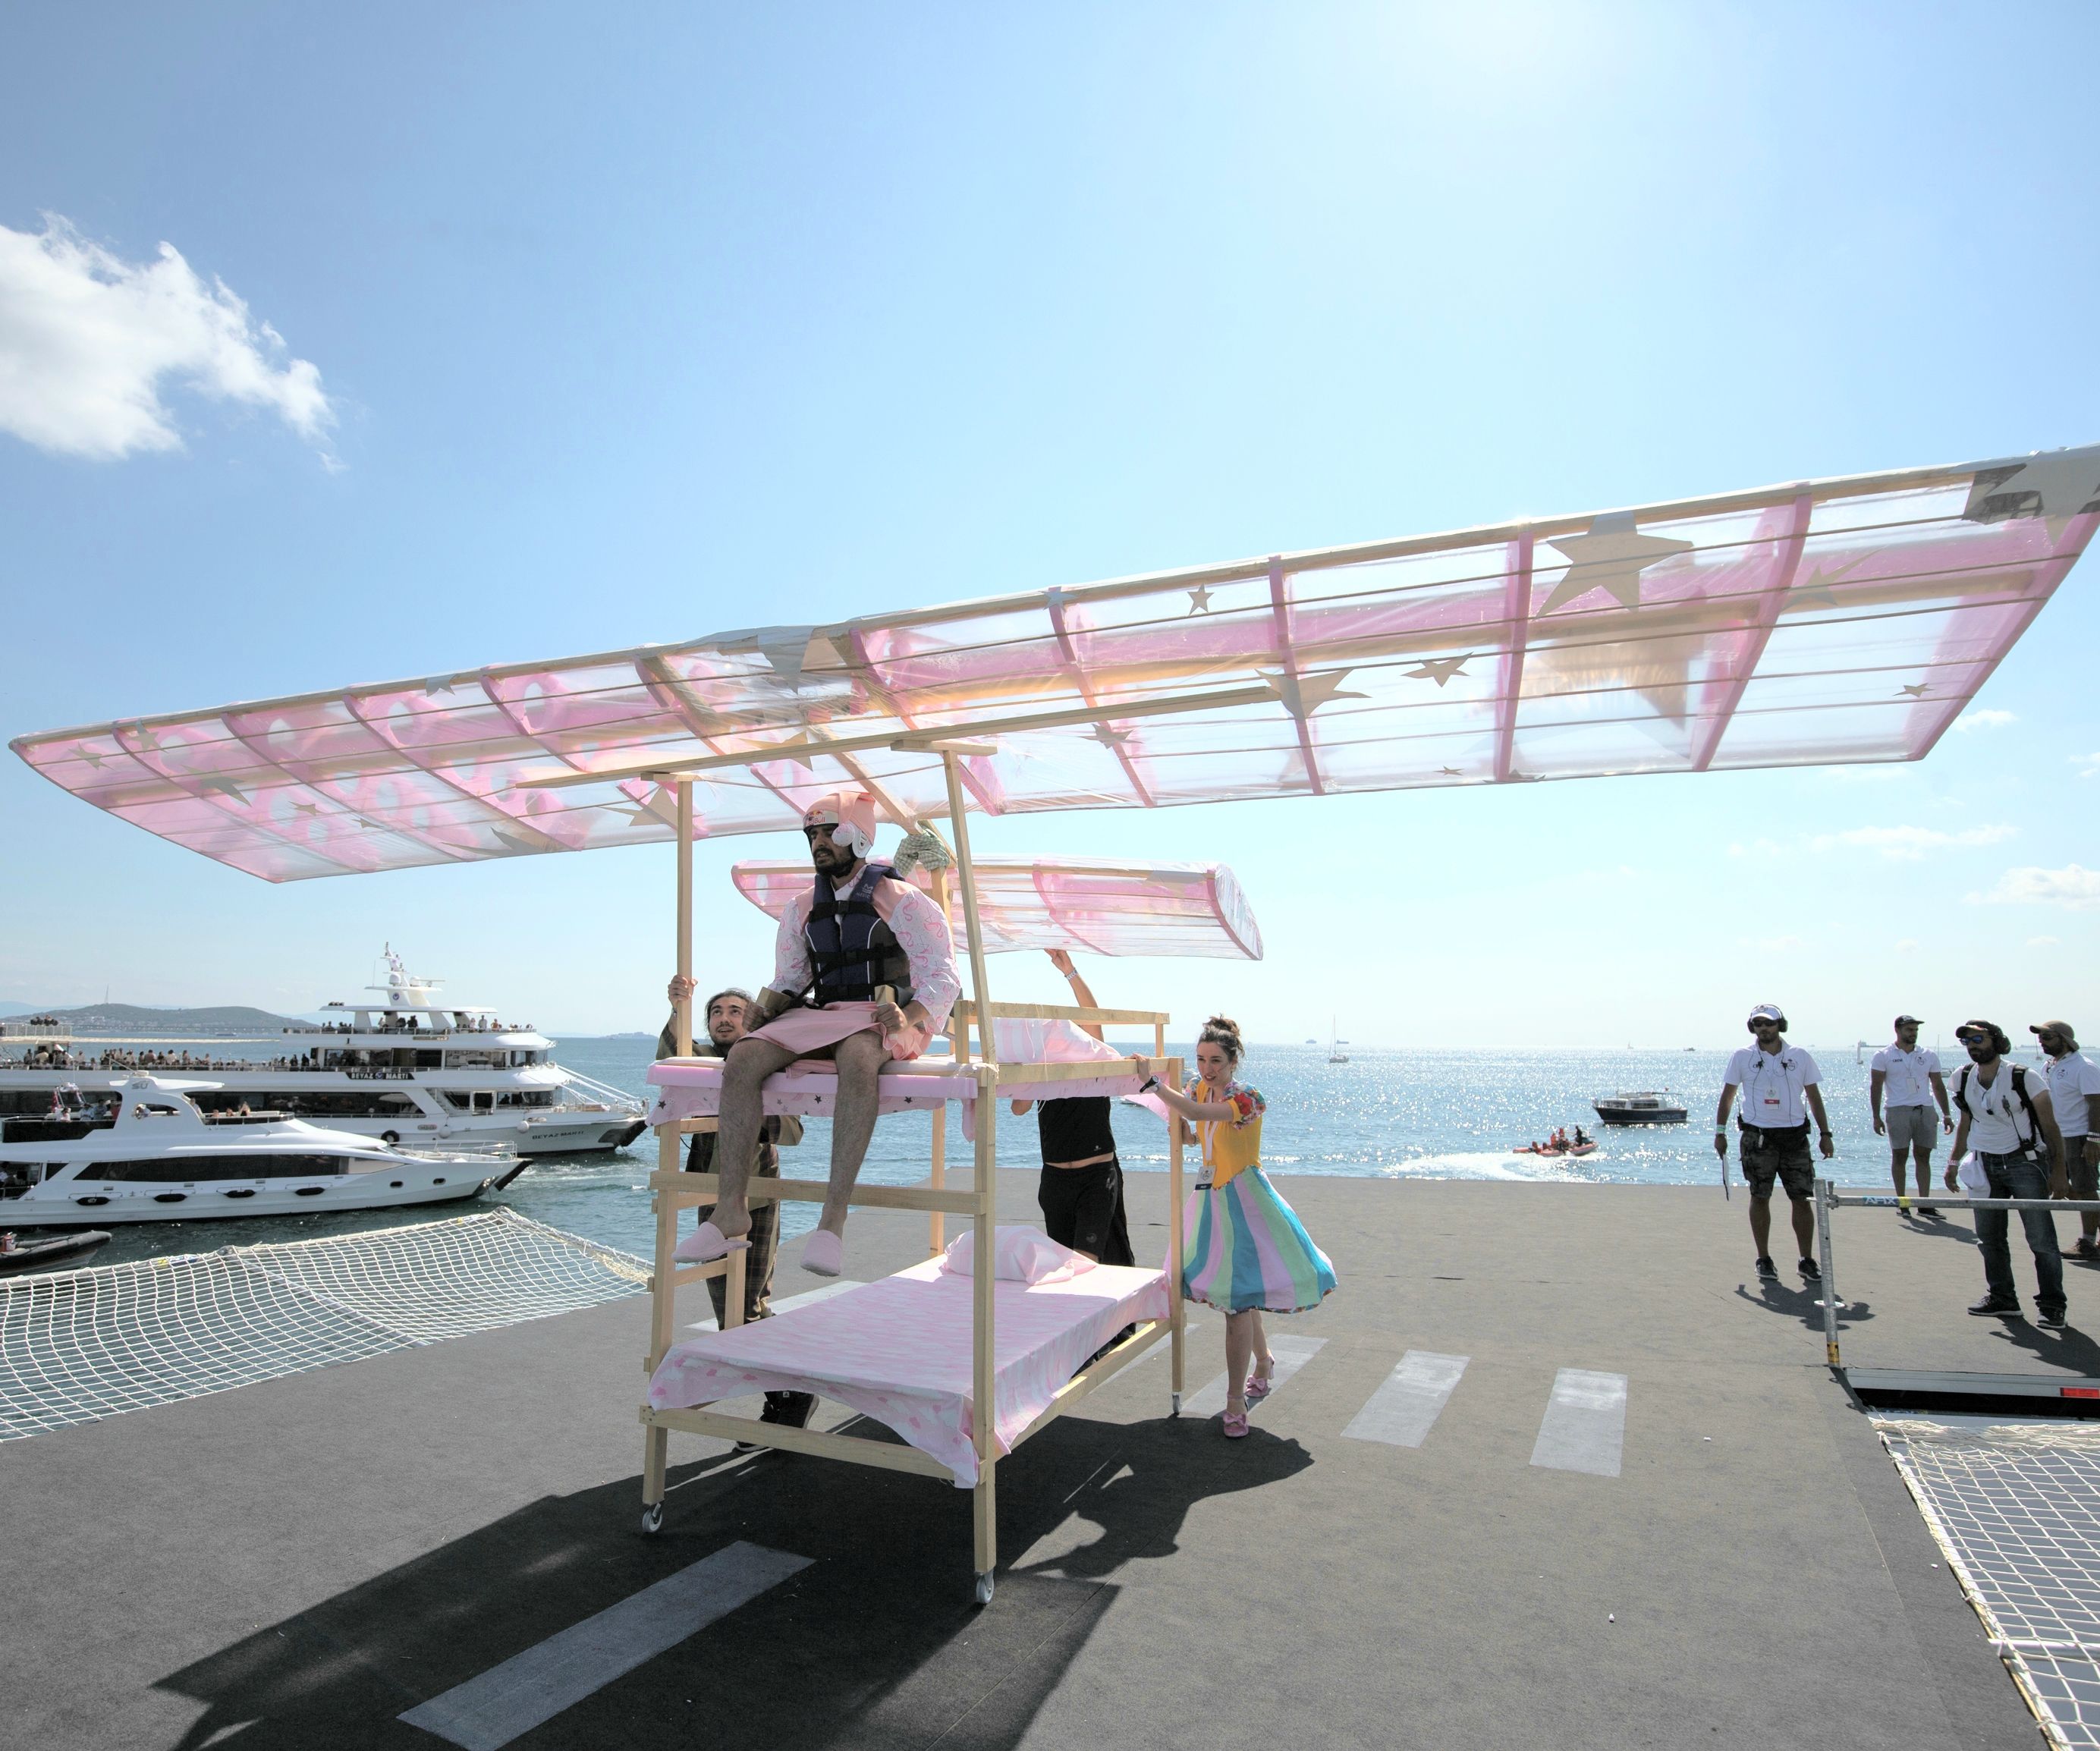 SweetDreams - a Dream Themed Aircraft for Flugtag